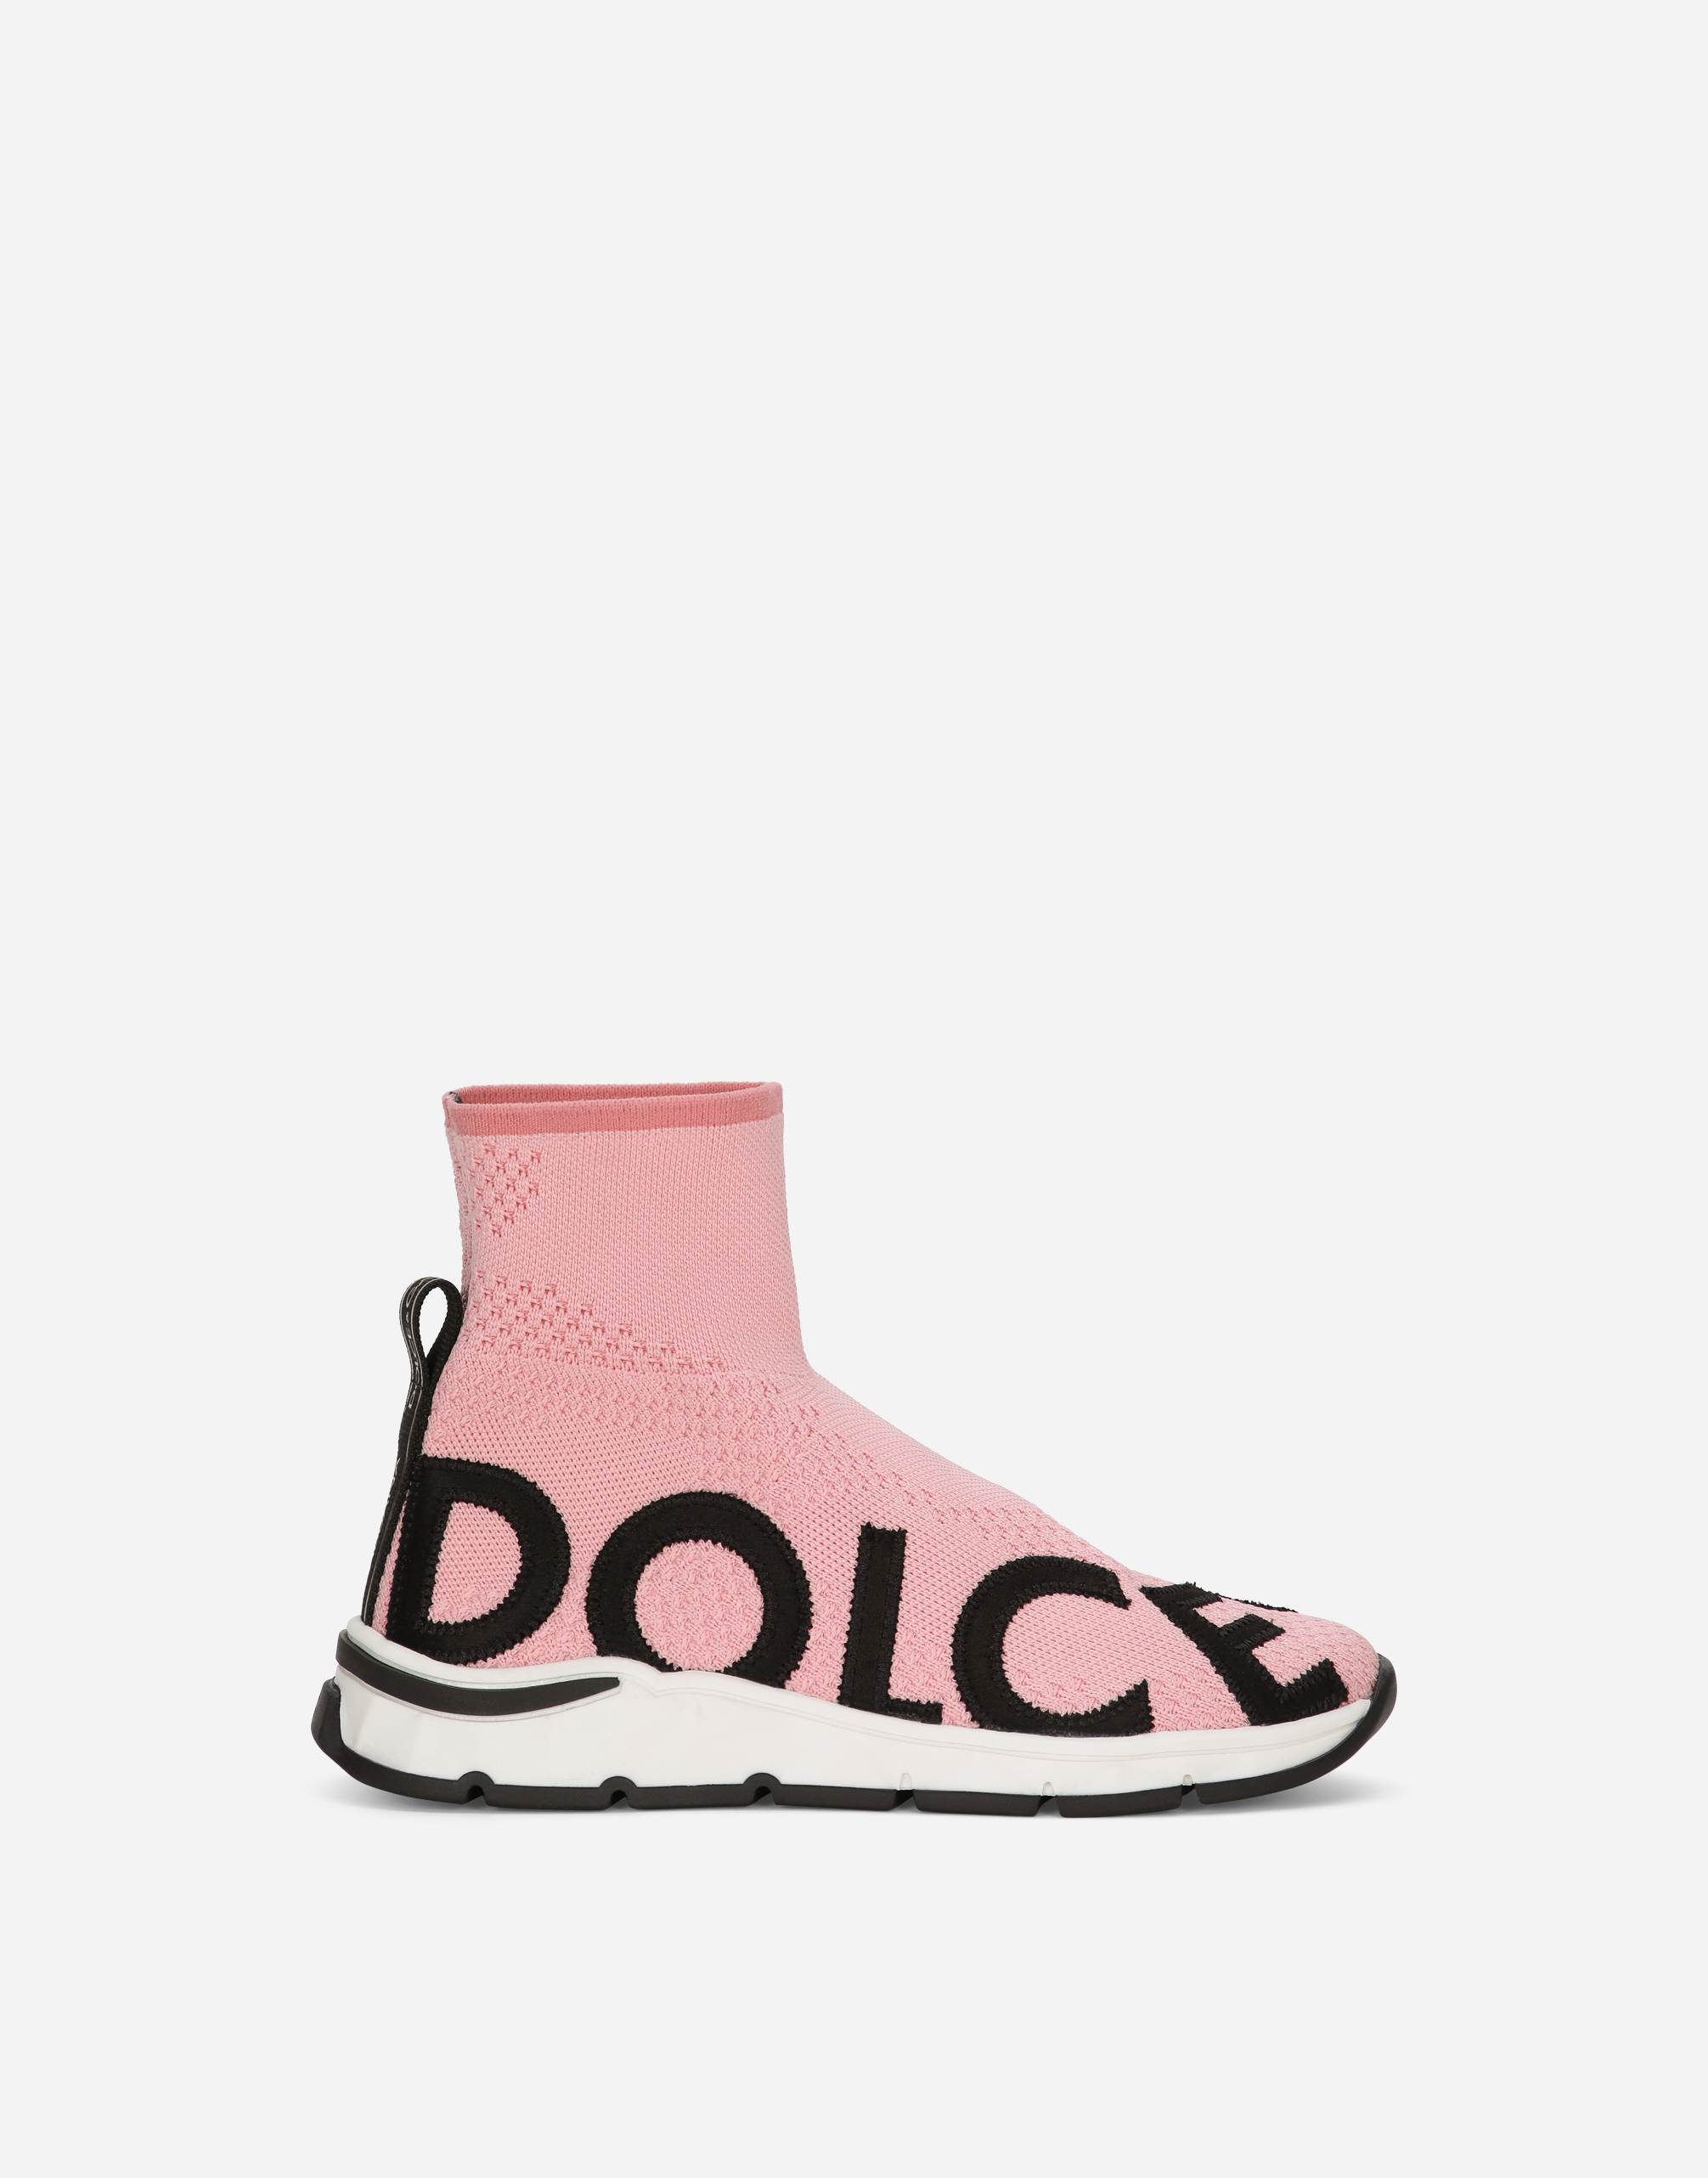 Sorrento 2.0 stretch mesh high-top sneakers in Pink